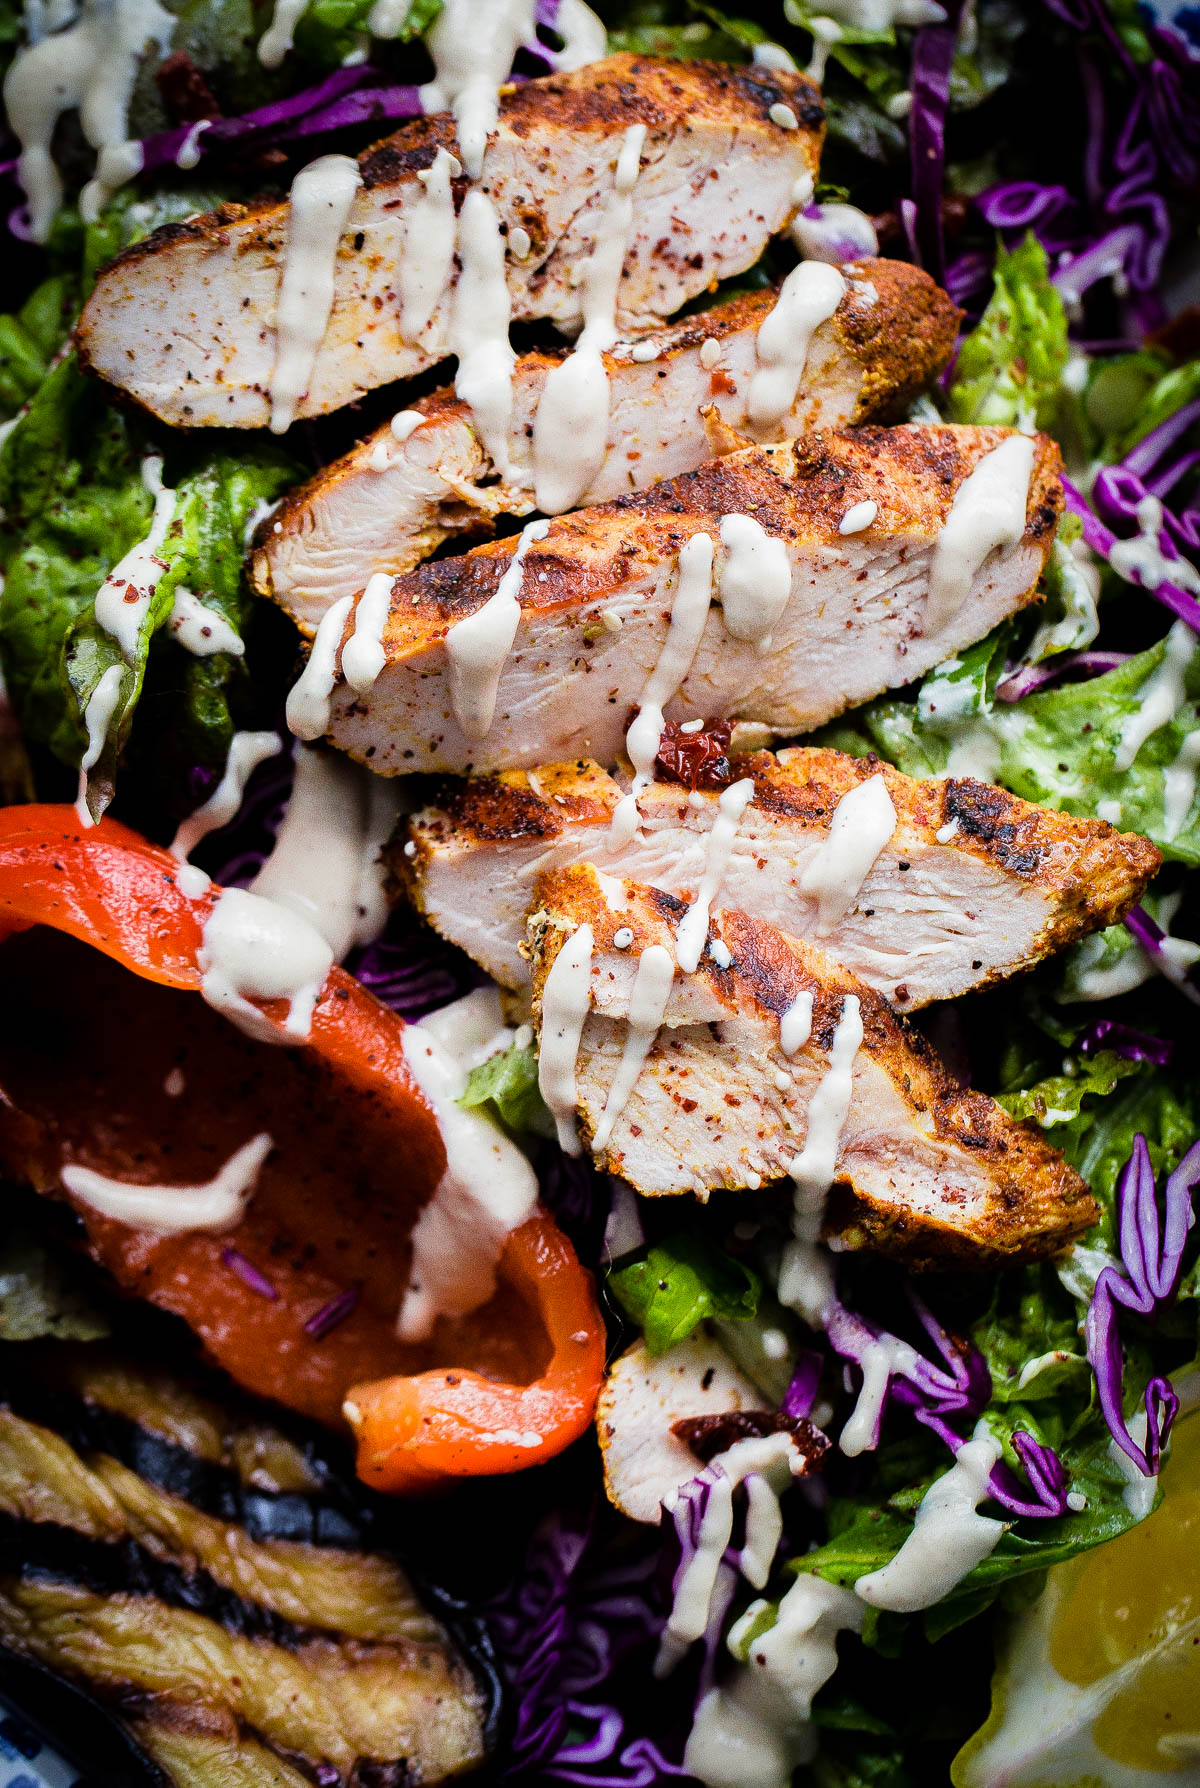 AMAZING Mediterranean Chicken Salad with Sumac Dressing. This salad is packed with flavor and is topped with tahini dressing! 